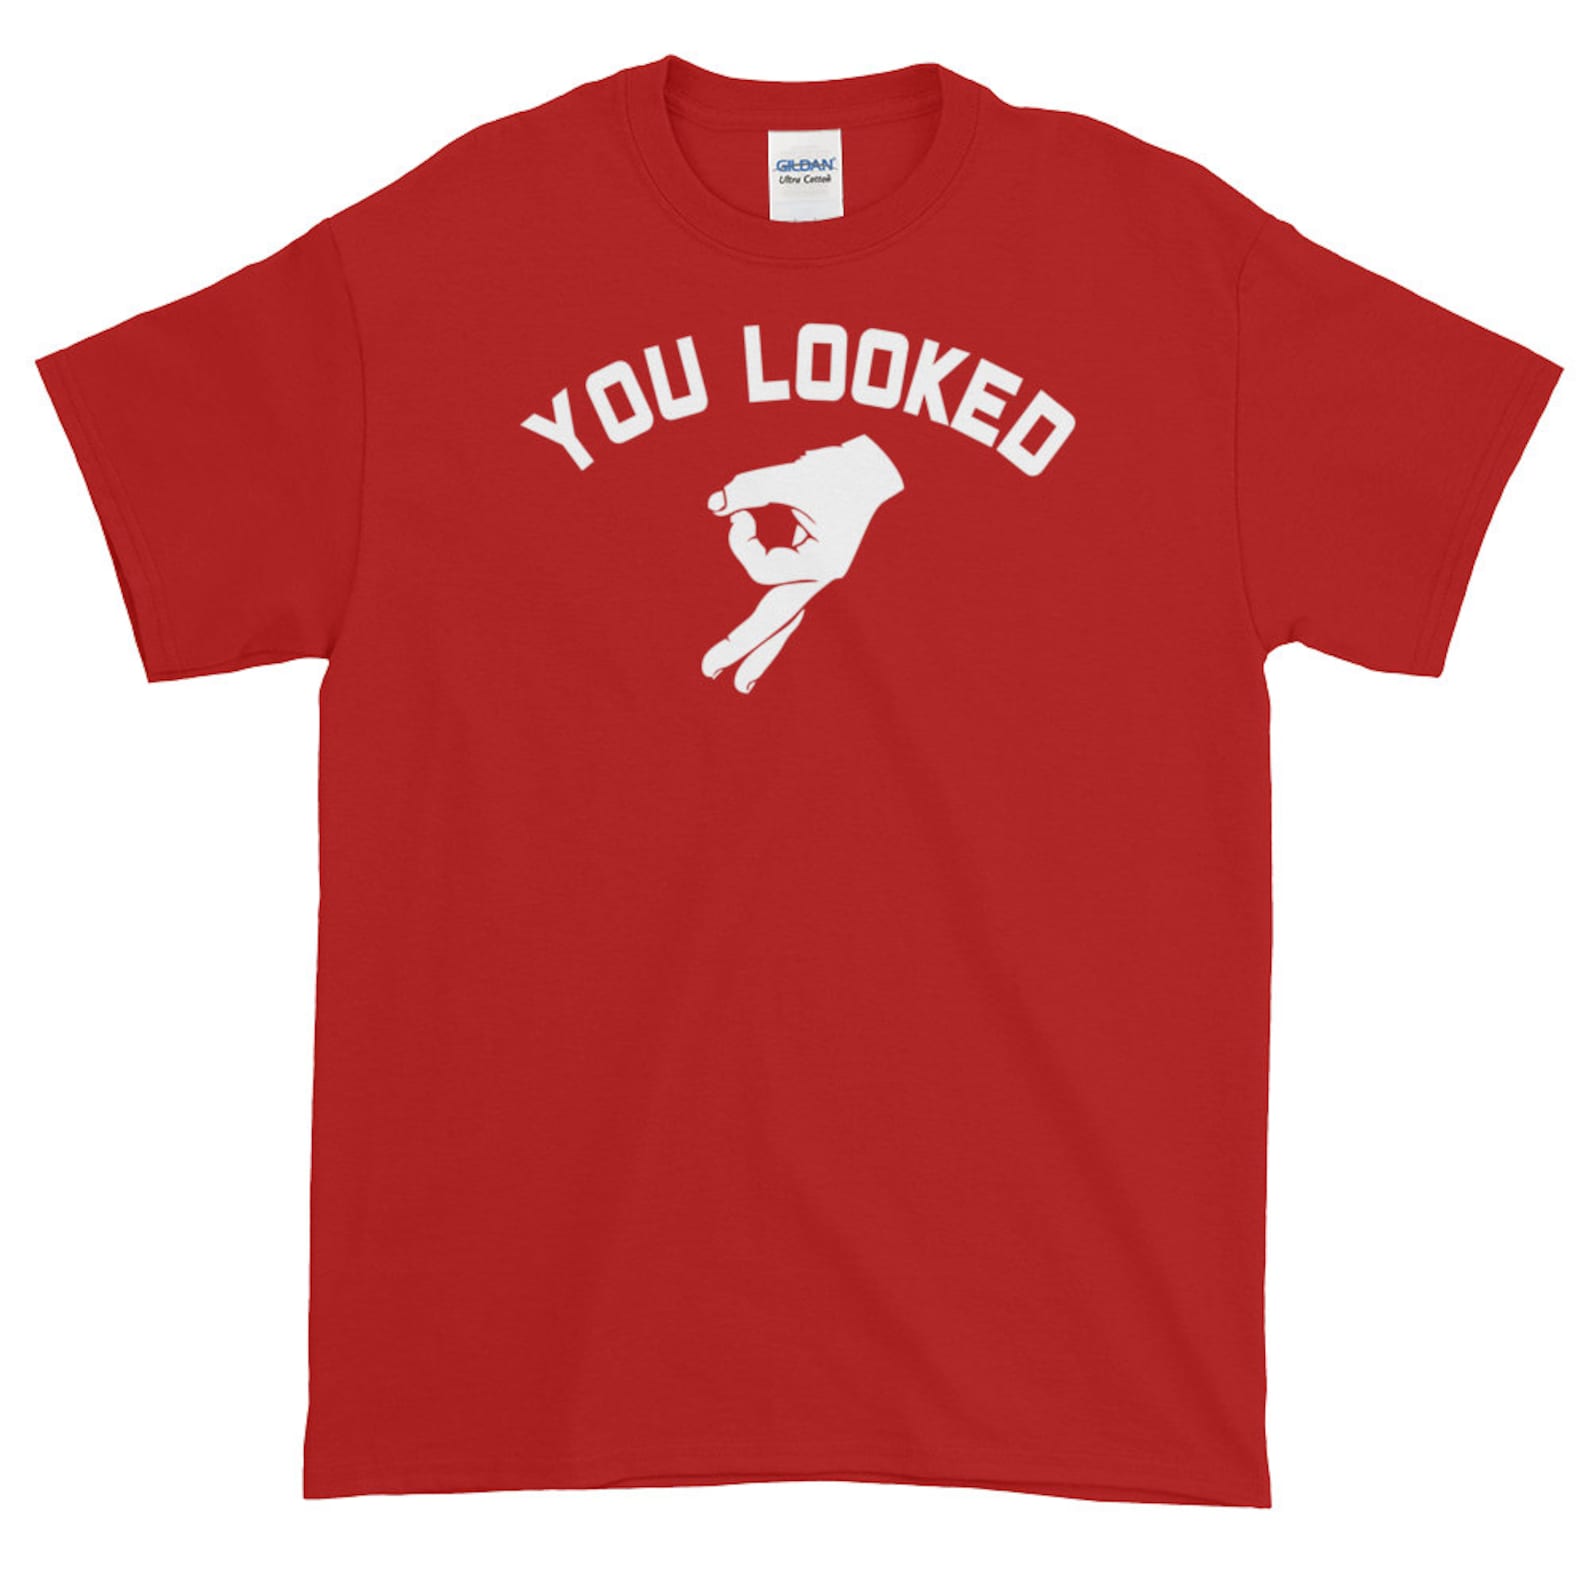 Made You Look T Shirt / You Looked T Shirt / Humorous T Shirt - Etsy